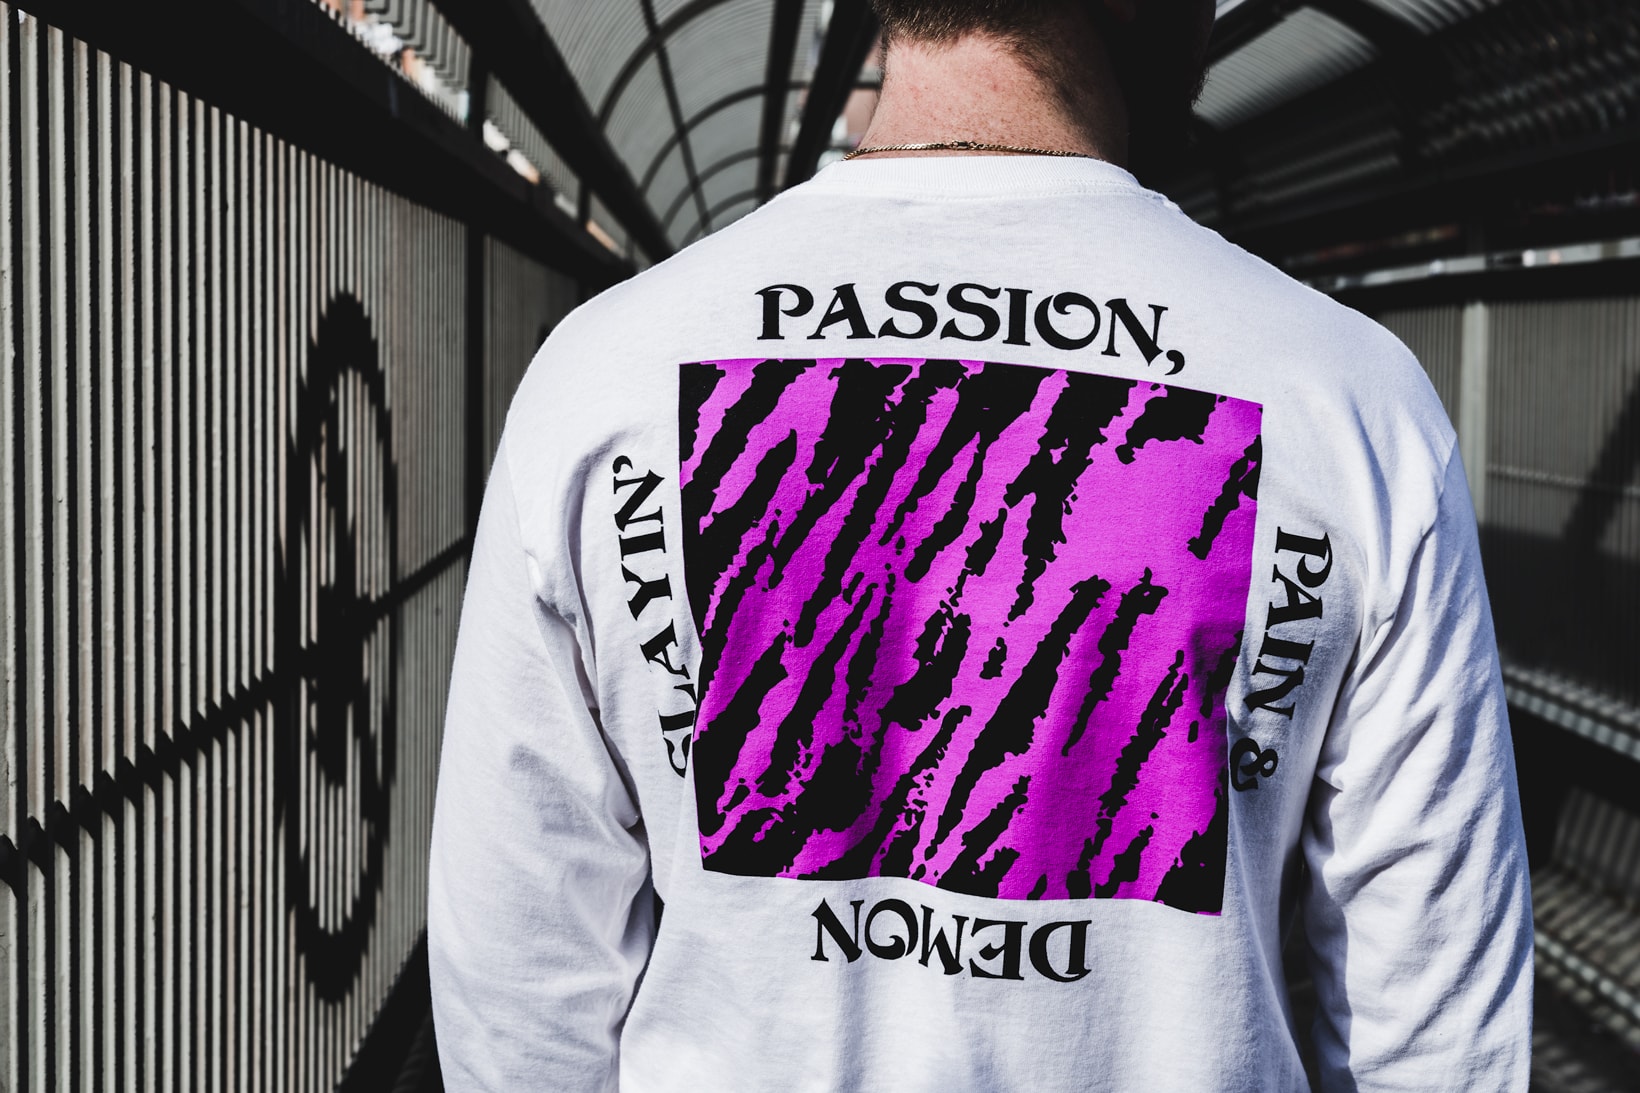 Kid Cudi "MR. RAGER" Collection by Virgil Abloh PASSION PAIN & DEMON SLAYIN’ TOUR Black Friday